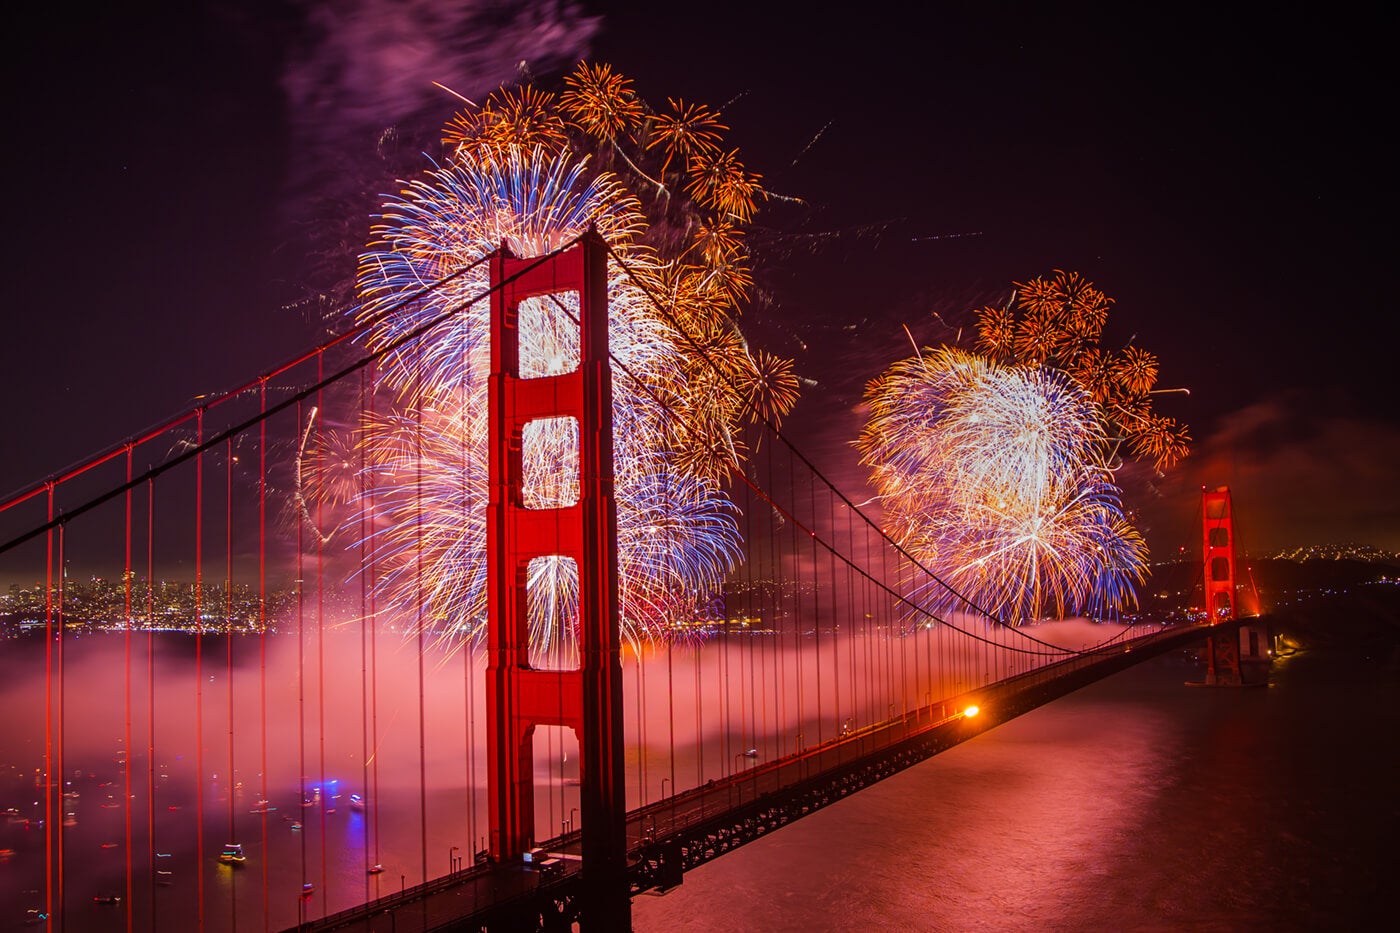 5 Tips for Photographing Fireworks